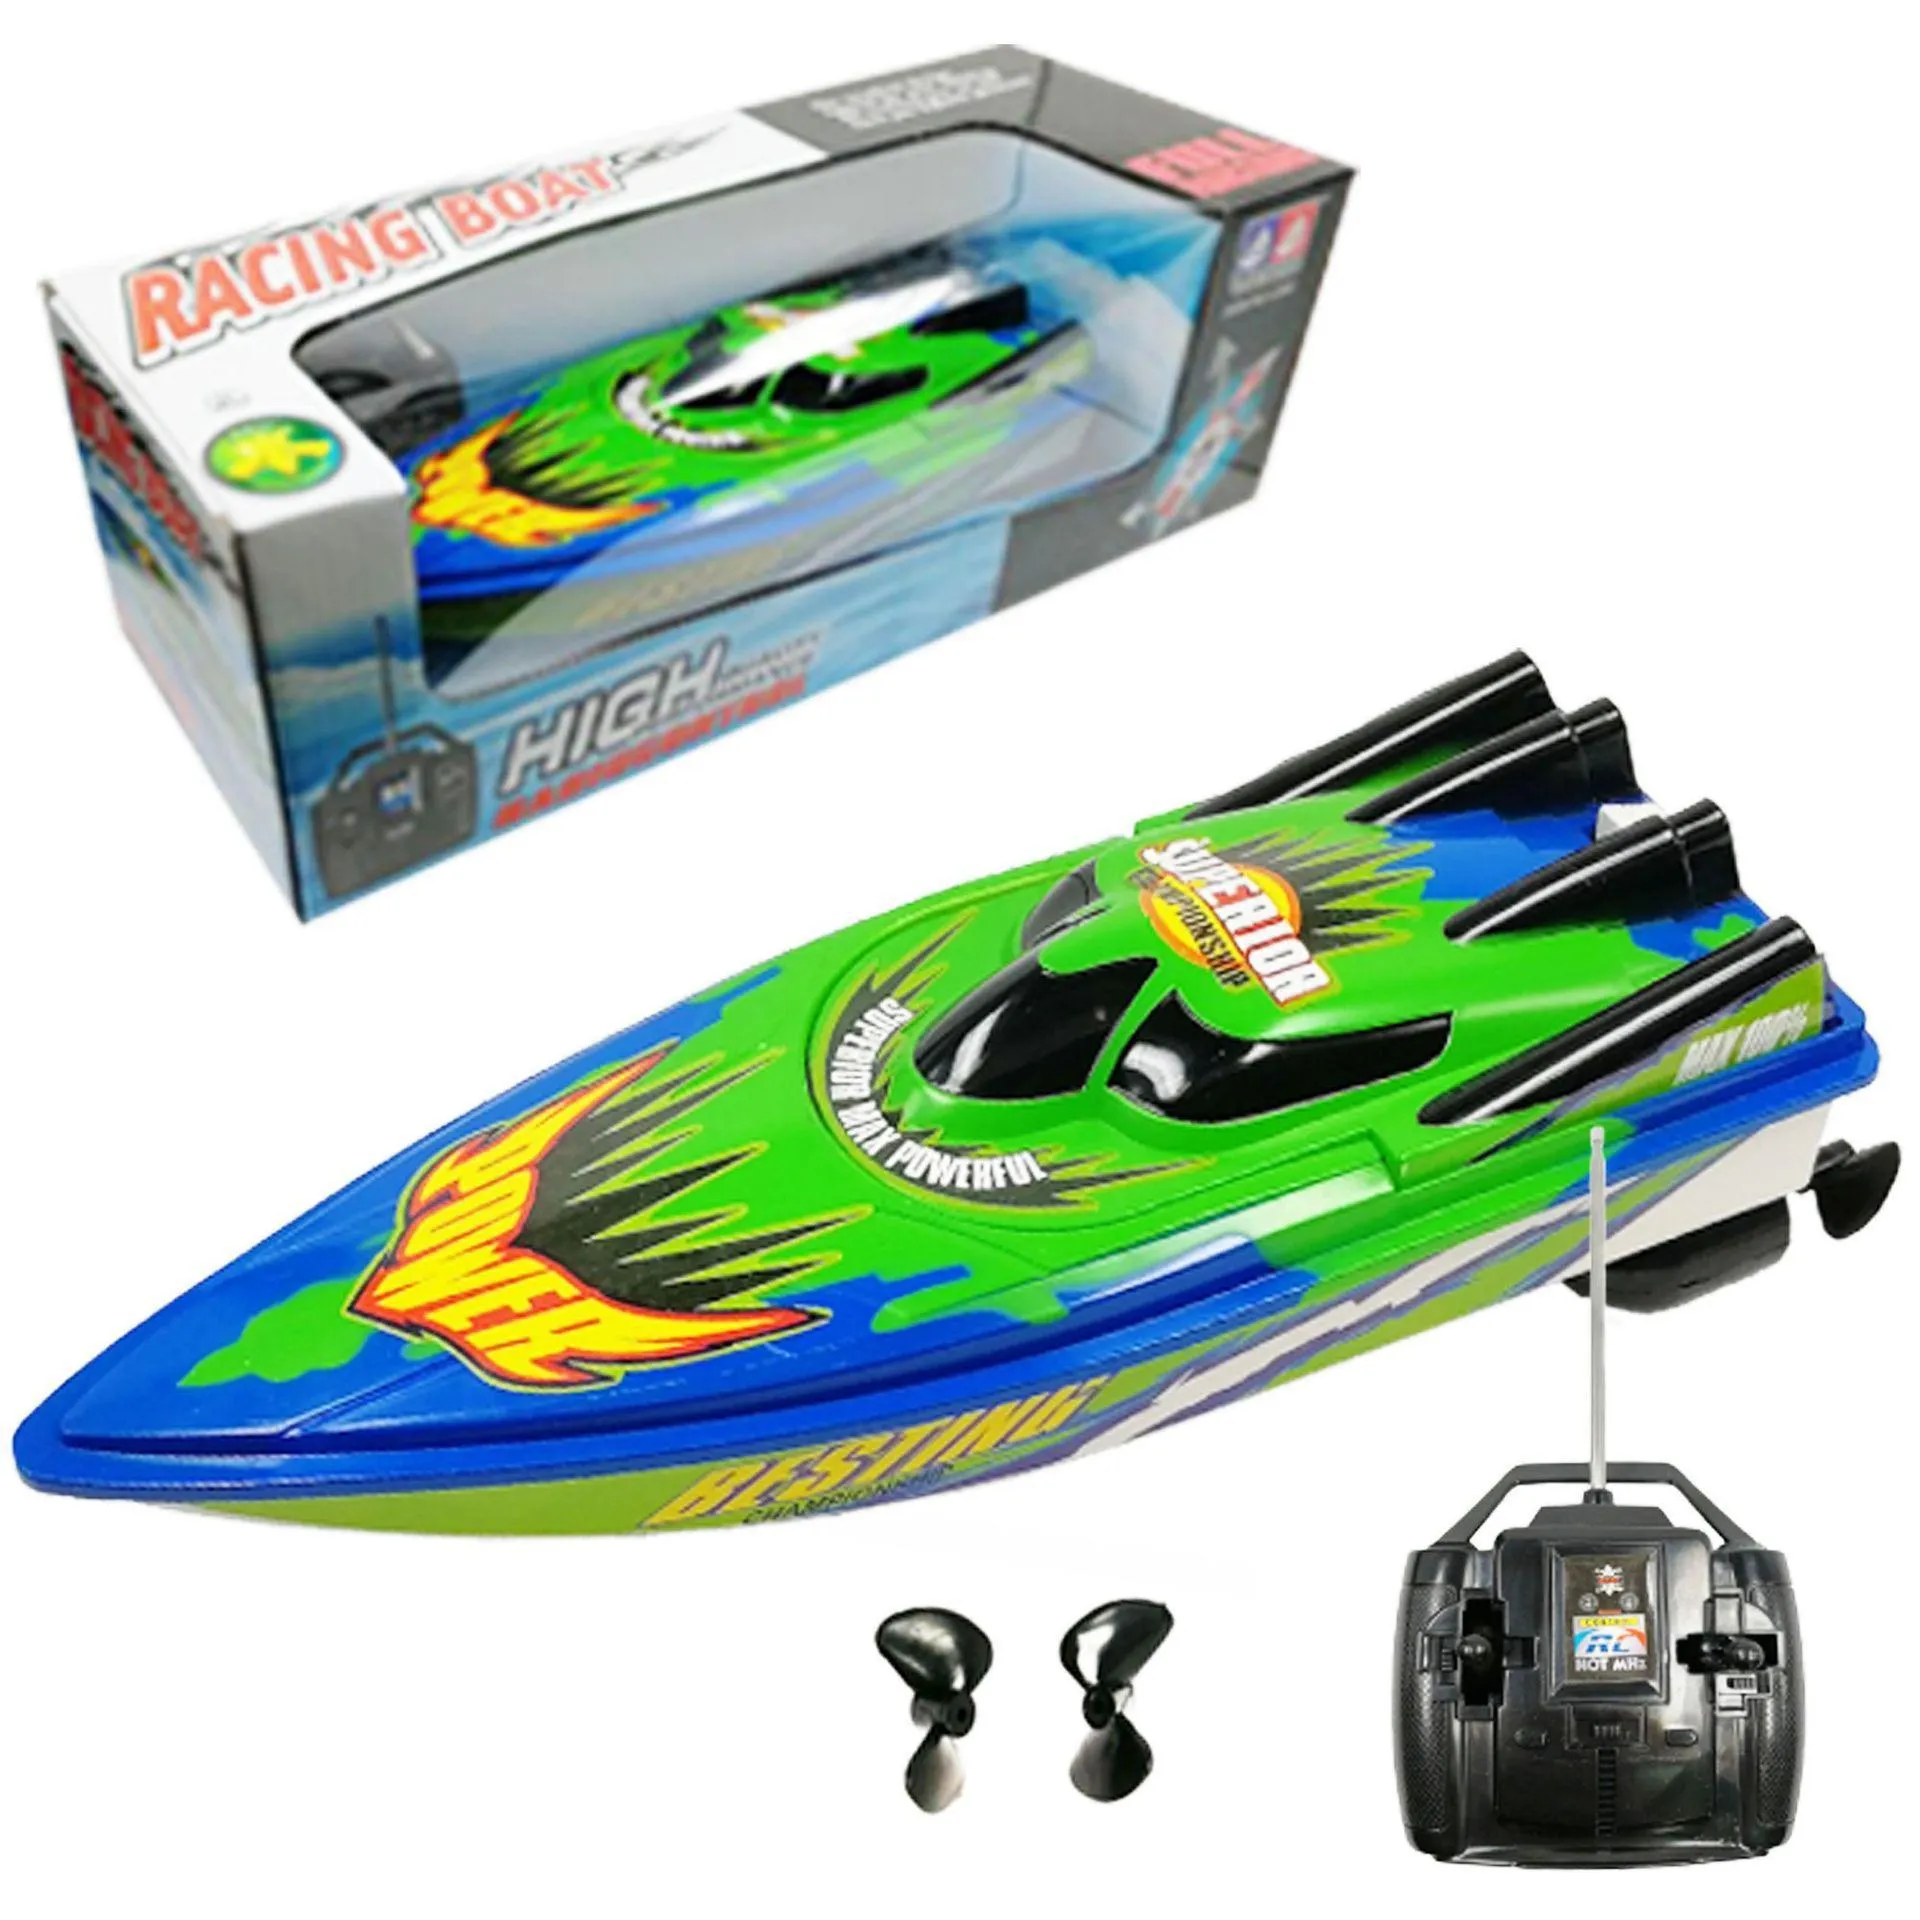 Large Remote Control Boat Toys RC Boat Toy Remote Control Fishing Boat  Speedboat Kit Christmas From Windstore, $52.34